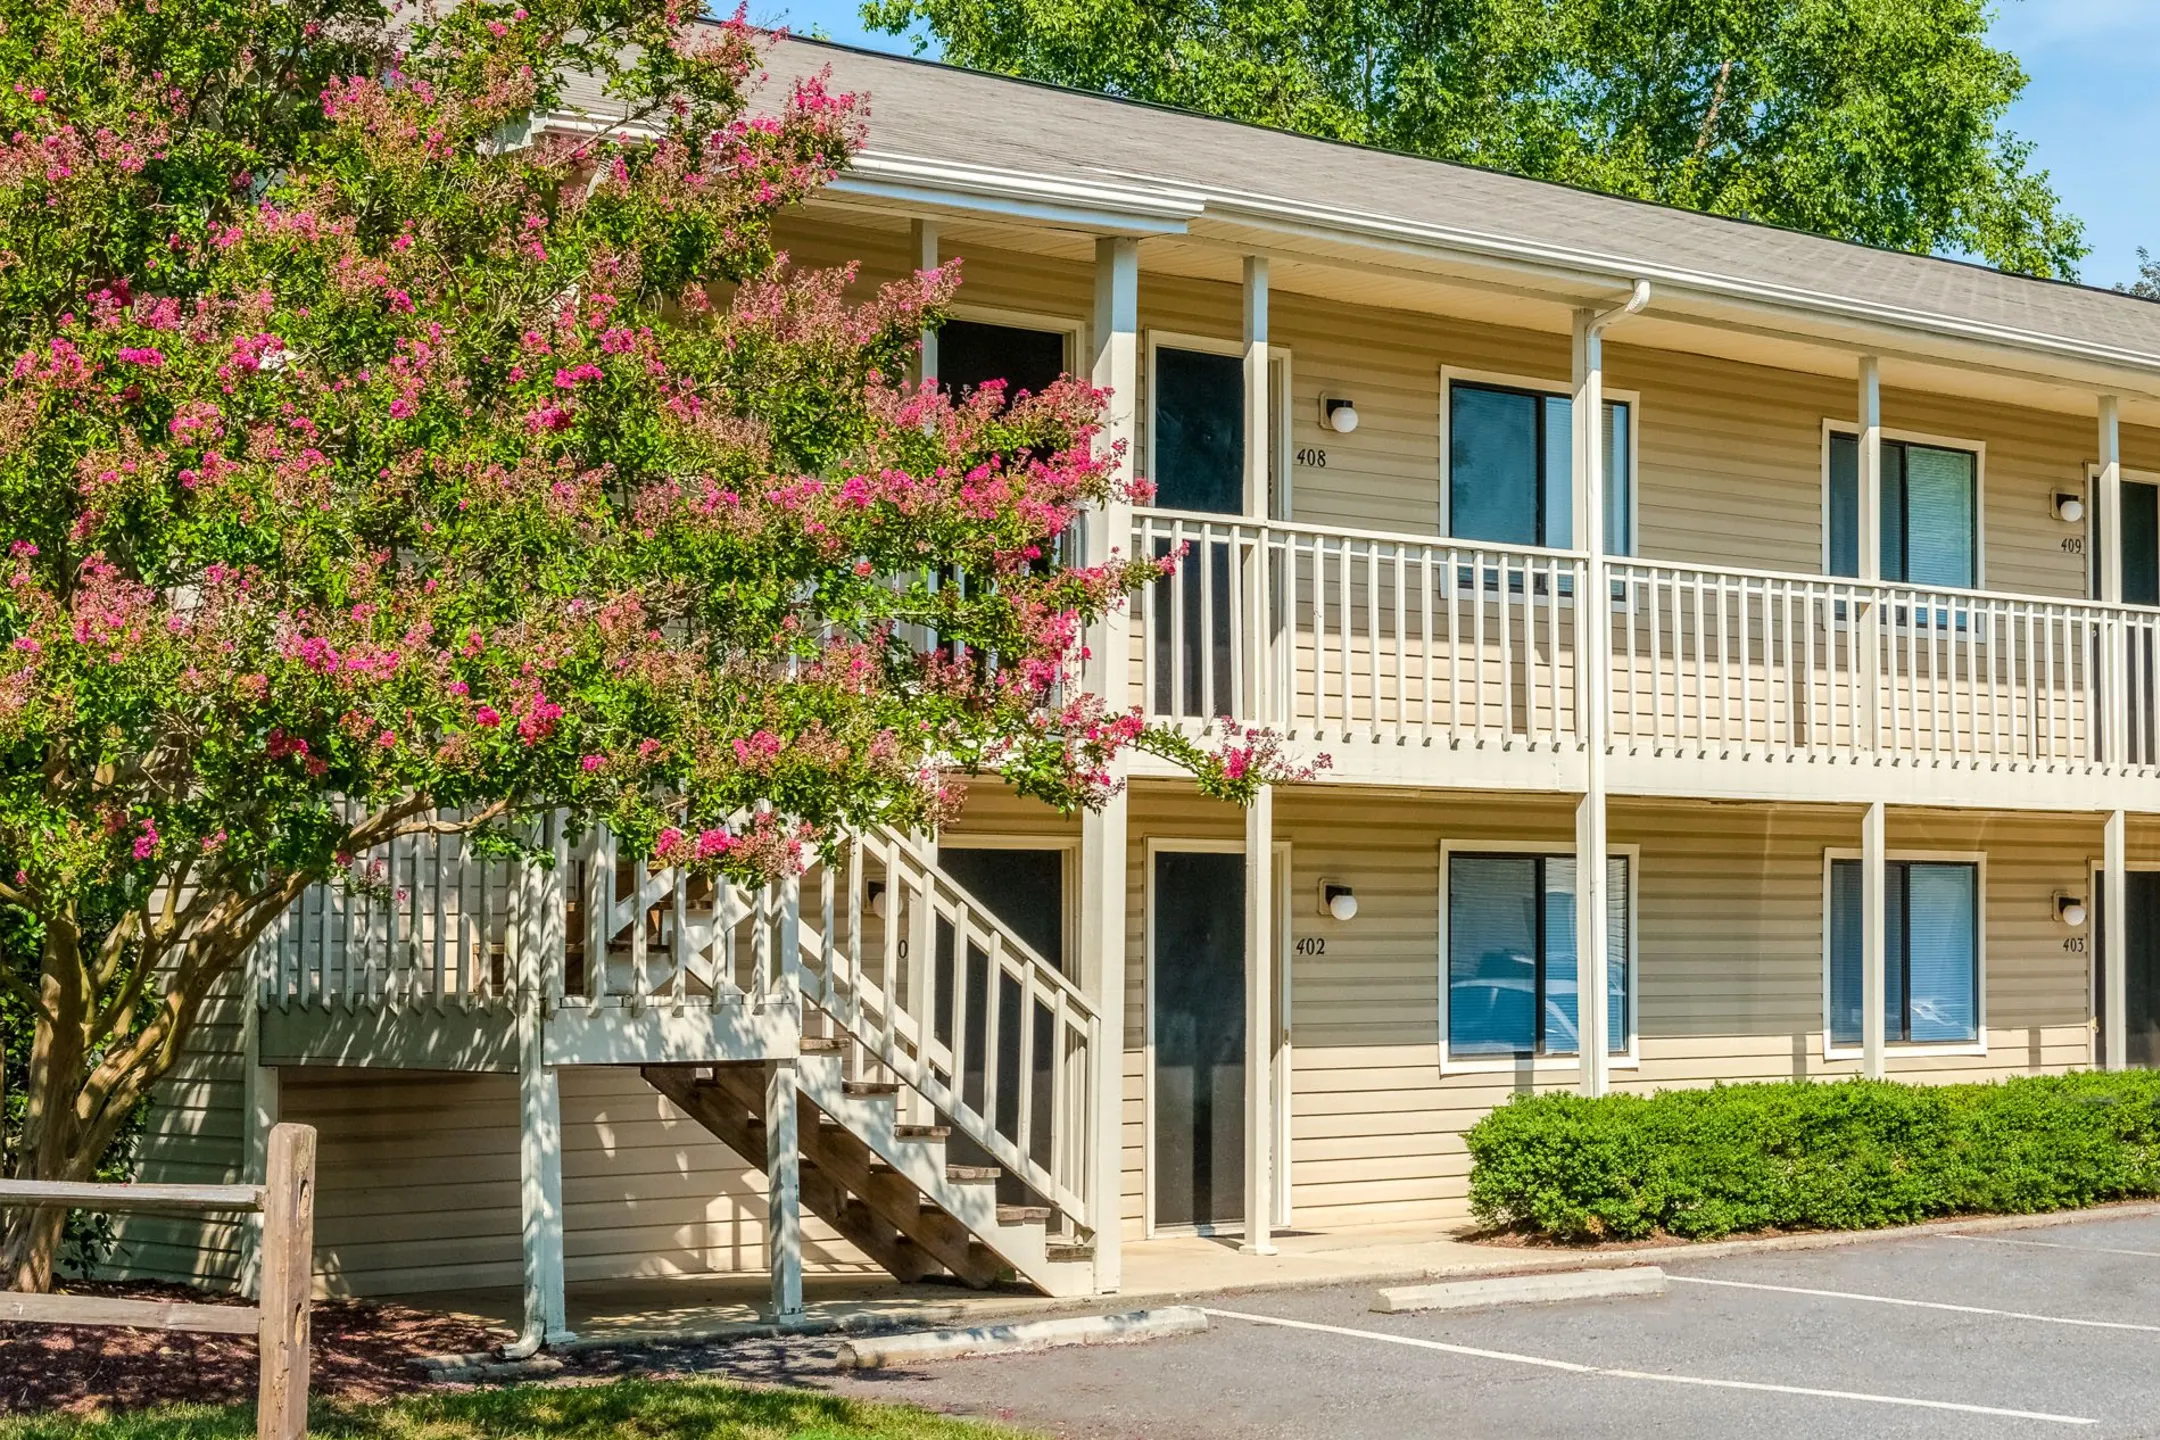 Building - Stonewood Apartments - Mooresville, NC